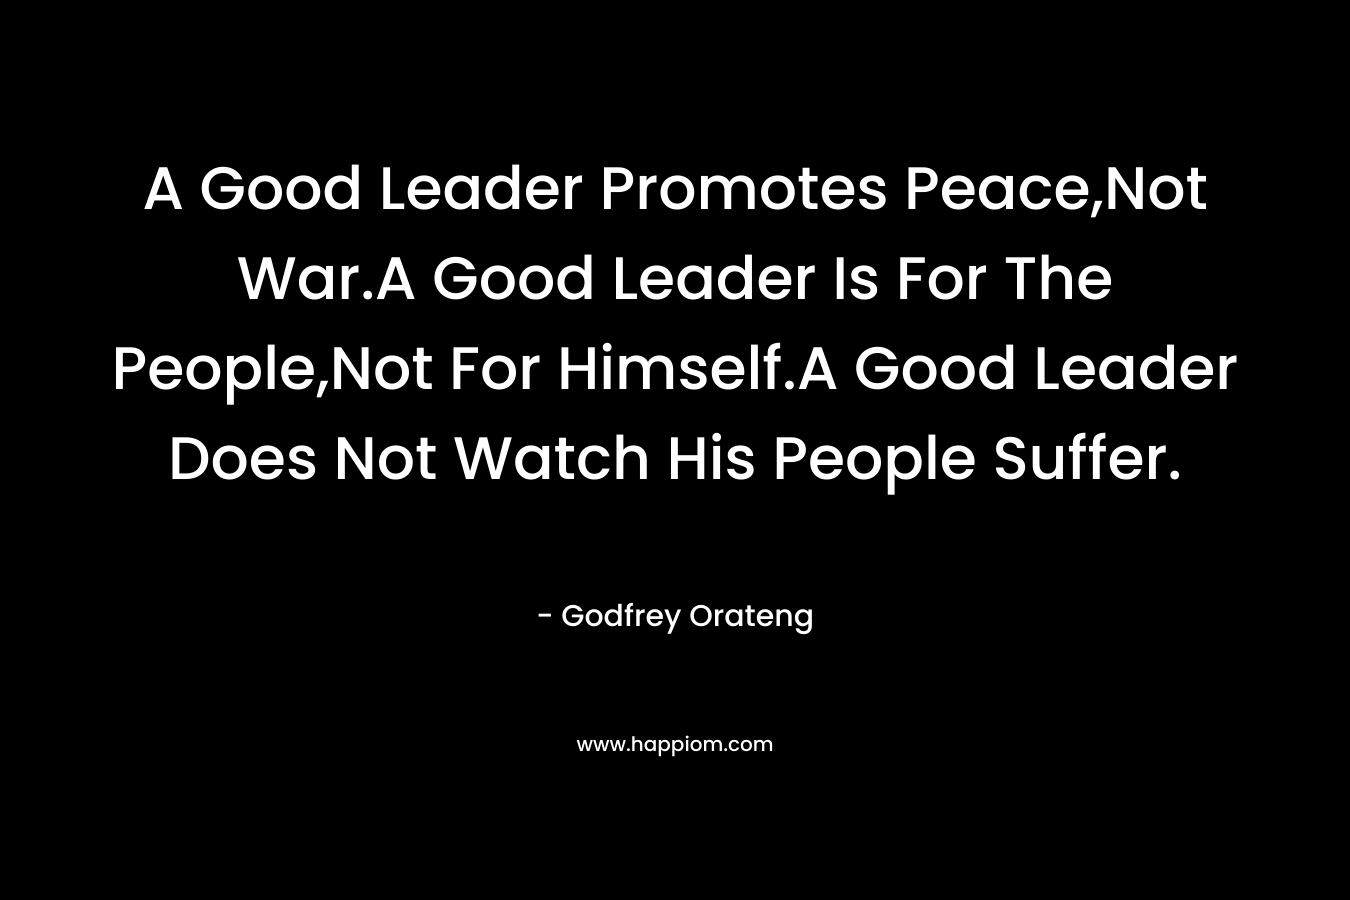 A Good Leader Promotes Peace,Not War.A Good Leader Is For The People,Not For Himself.A Good Leader Does Not Watch His People Suffer.